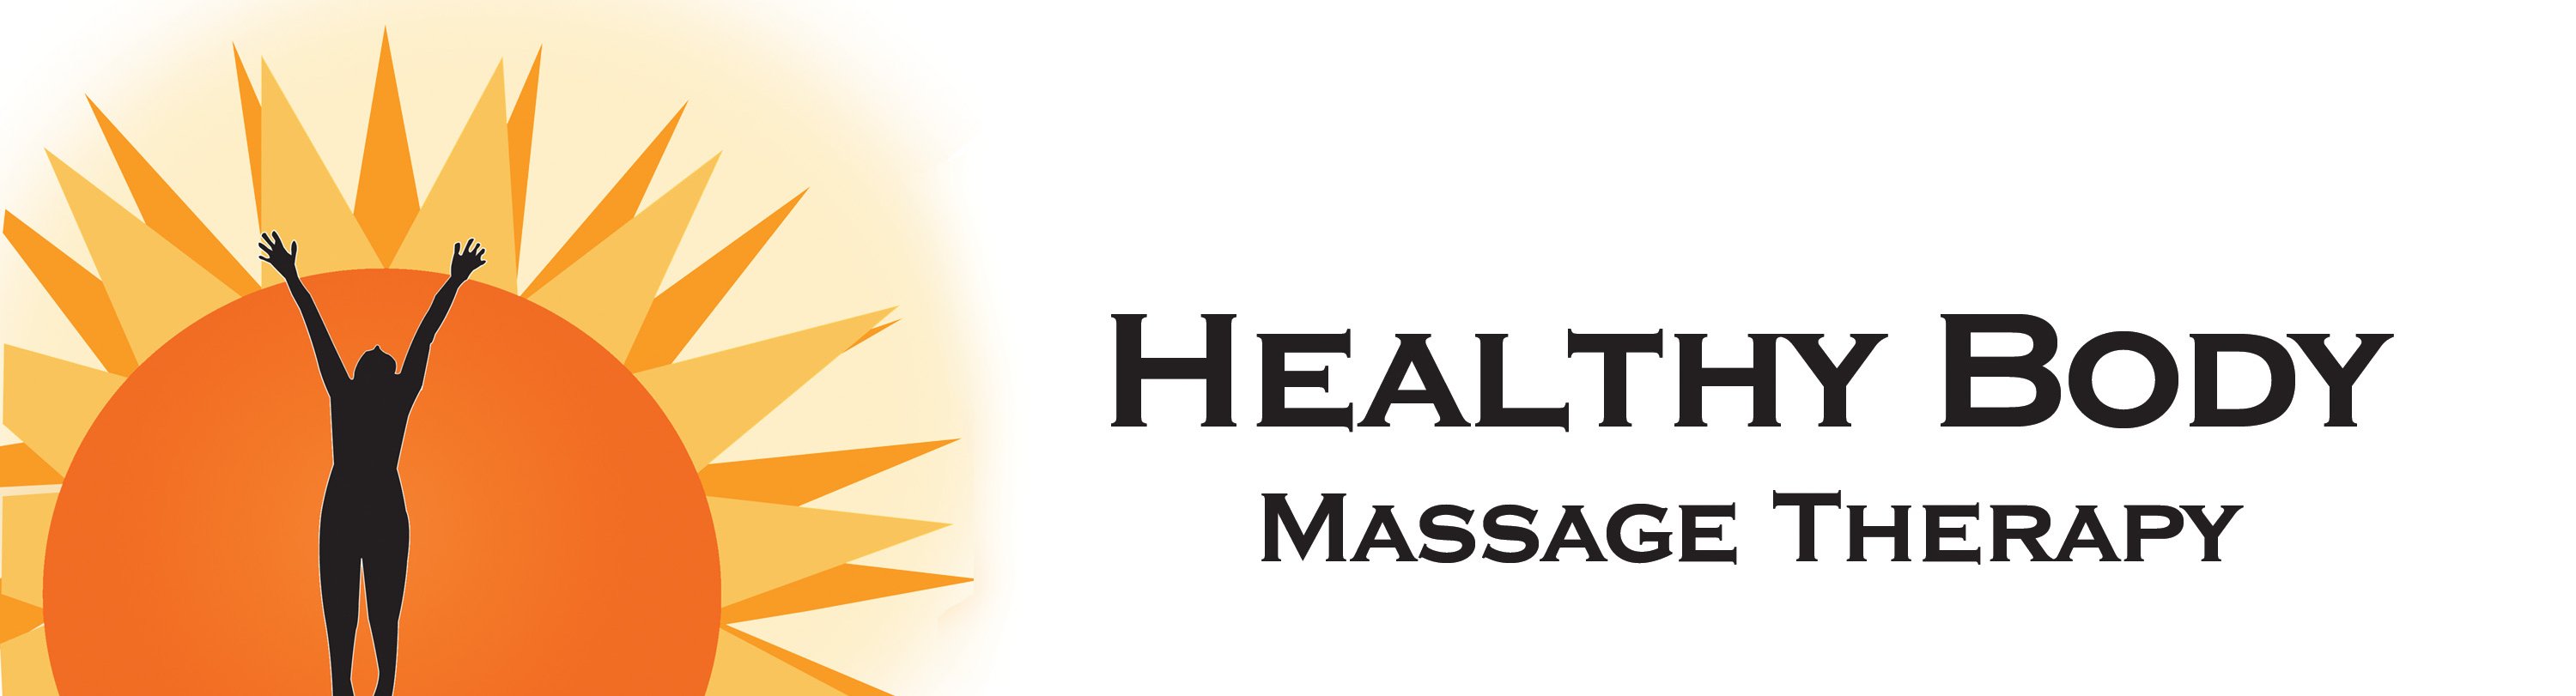 Massage therapy in Grants Pass Southern Oregon